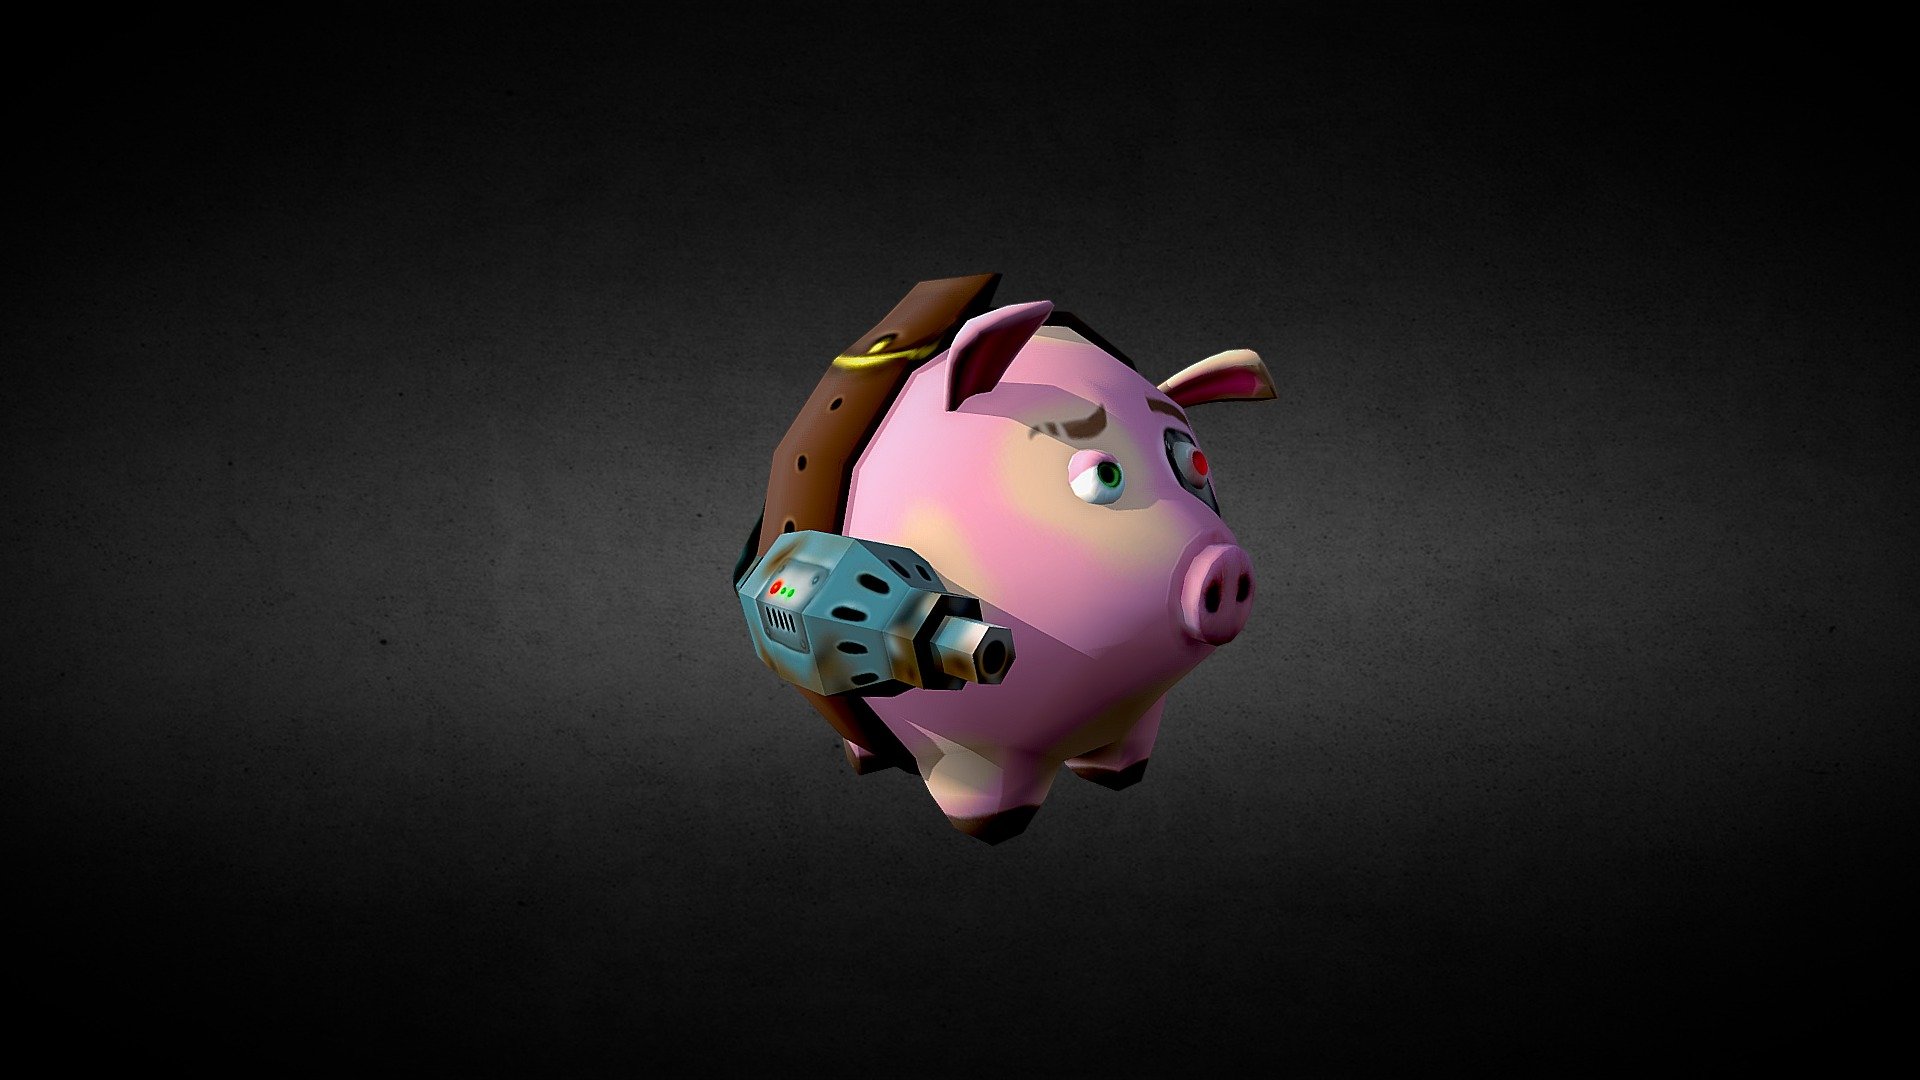 This is my own little cartoon terminator pig.
**cute but deadly. **
A low poly Asset for a game I want to make.
Made with 3Ds Max and textured in Mudbox 3d model